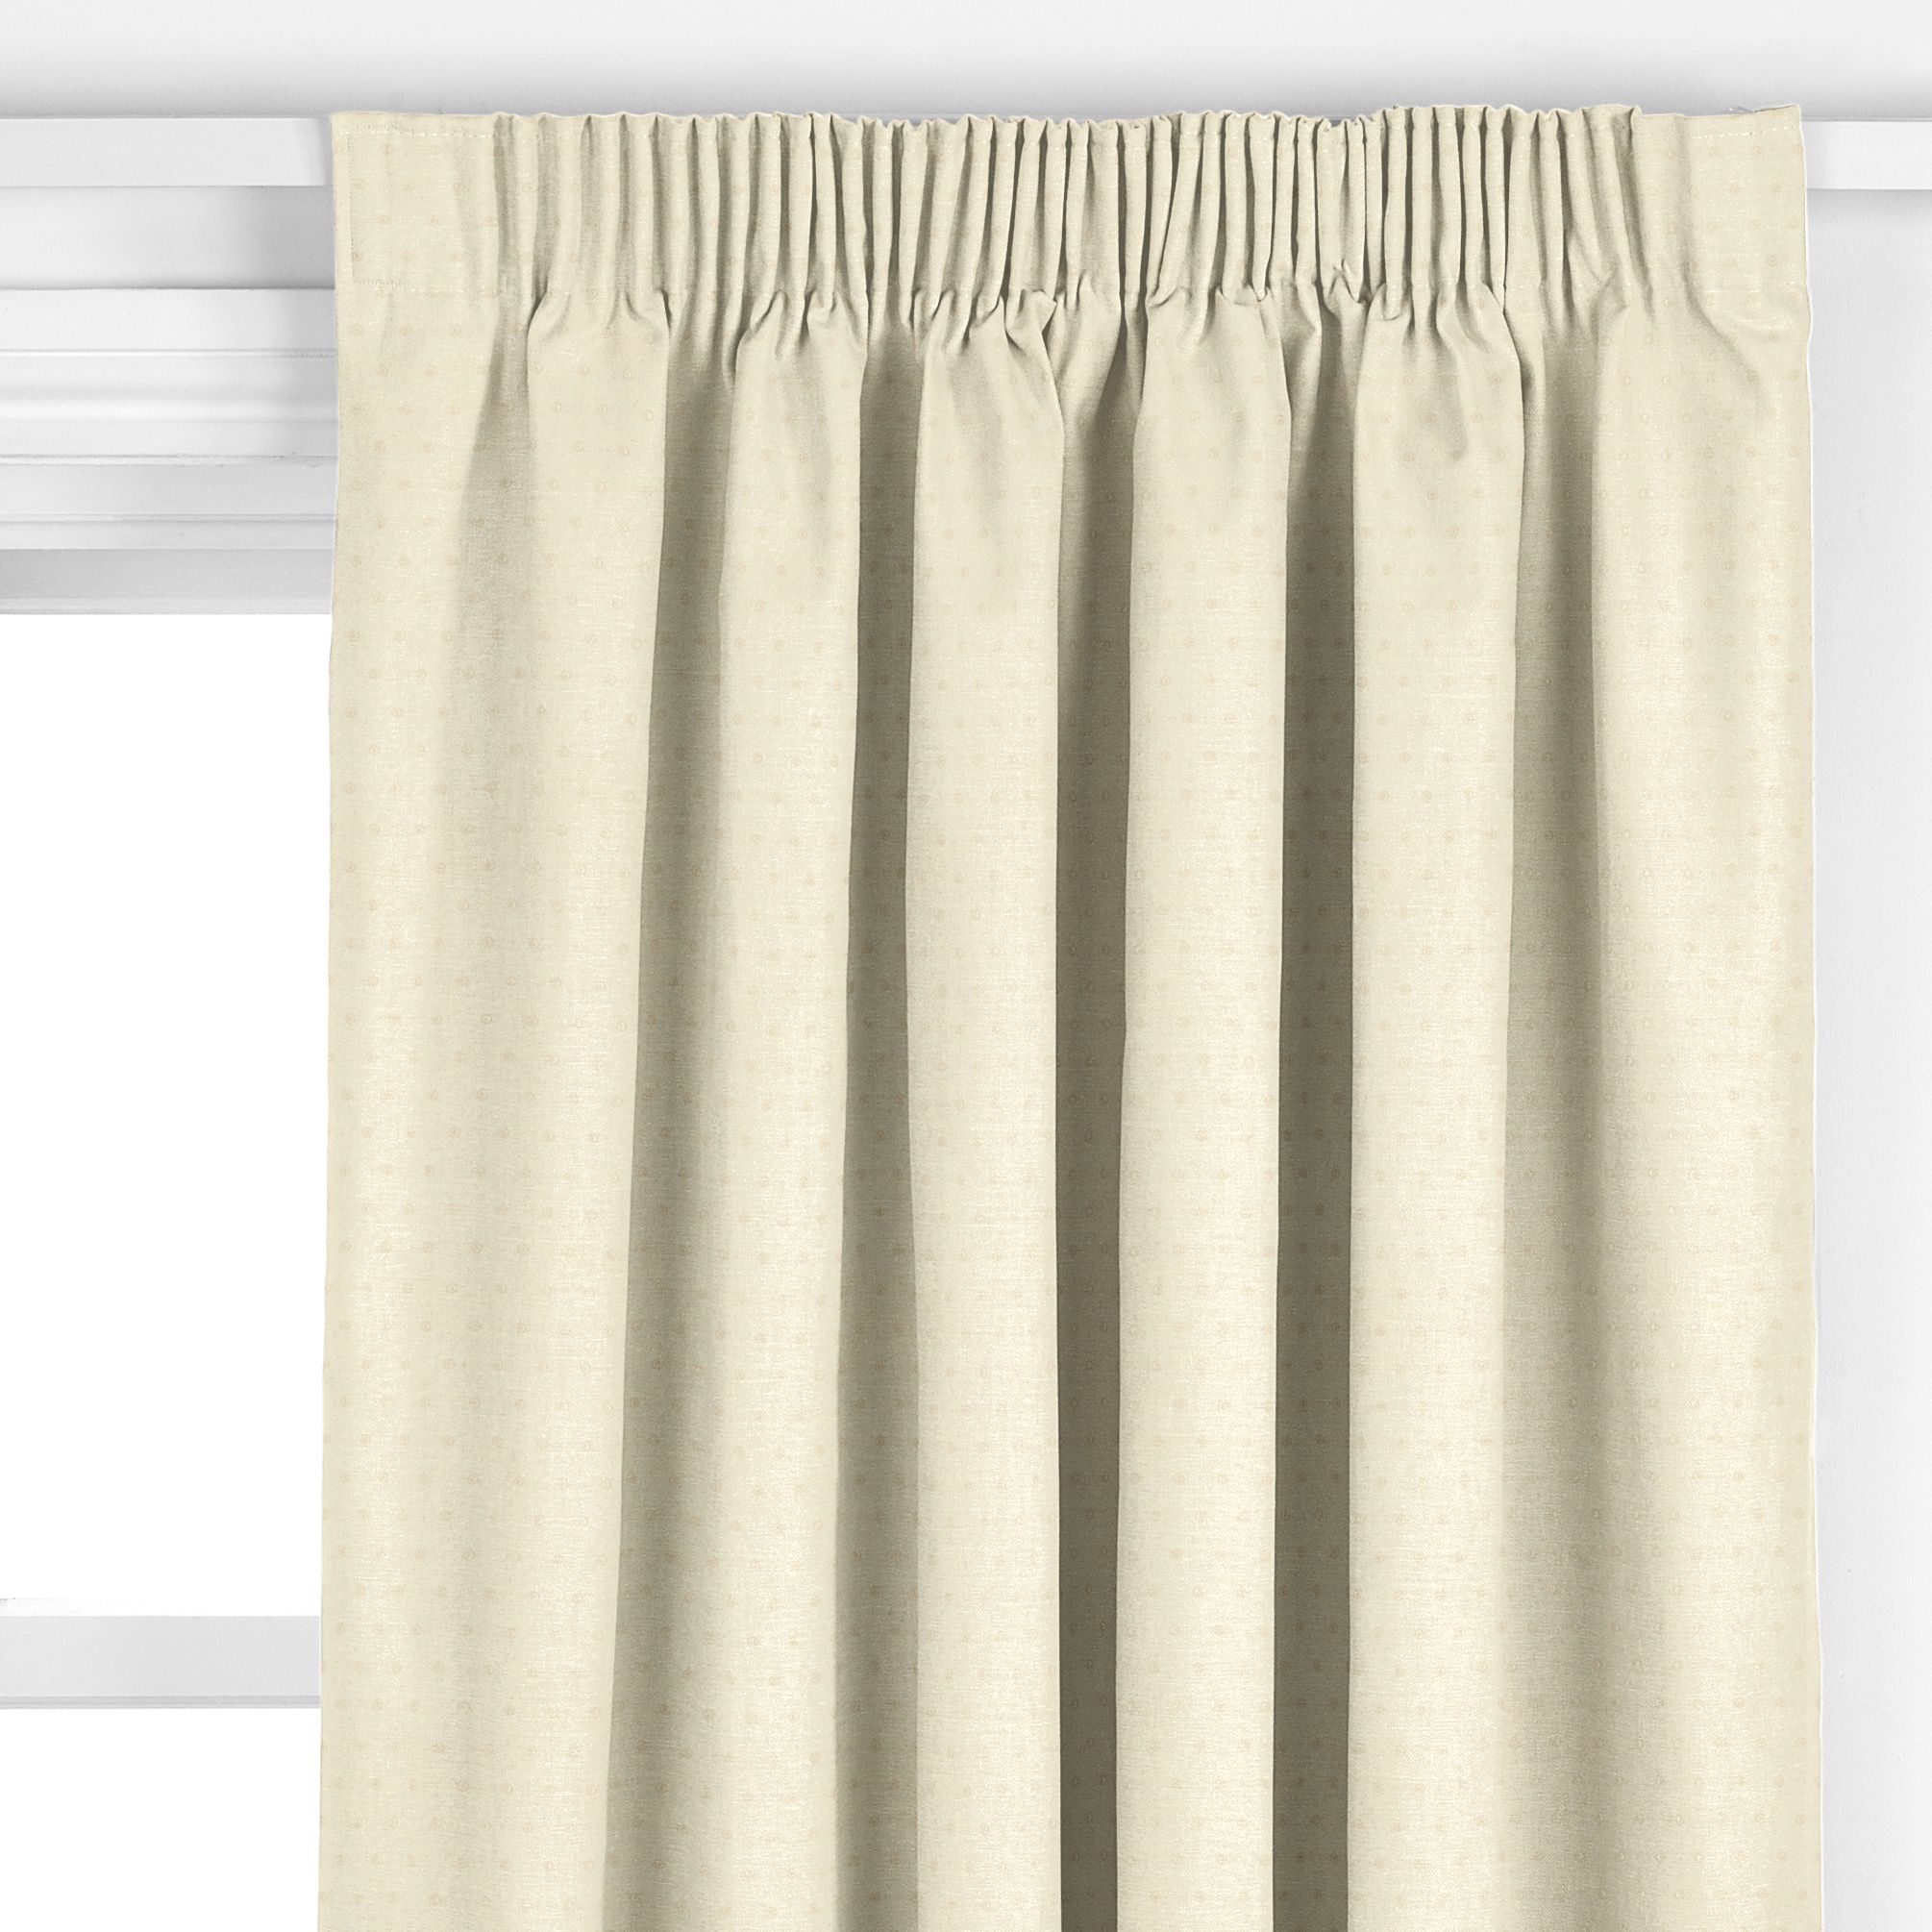 John Lewis Chequers Pencil Pleat Curtains, Oyster